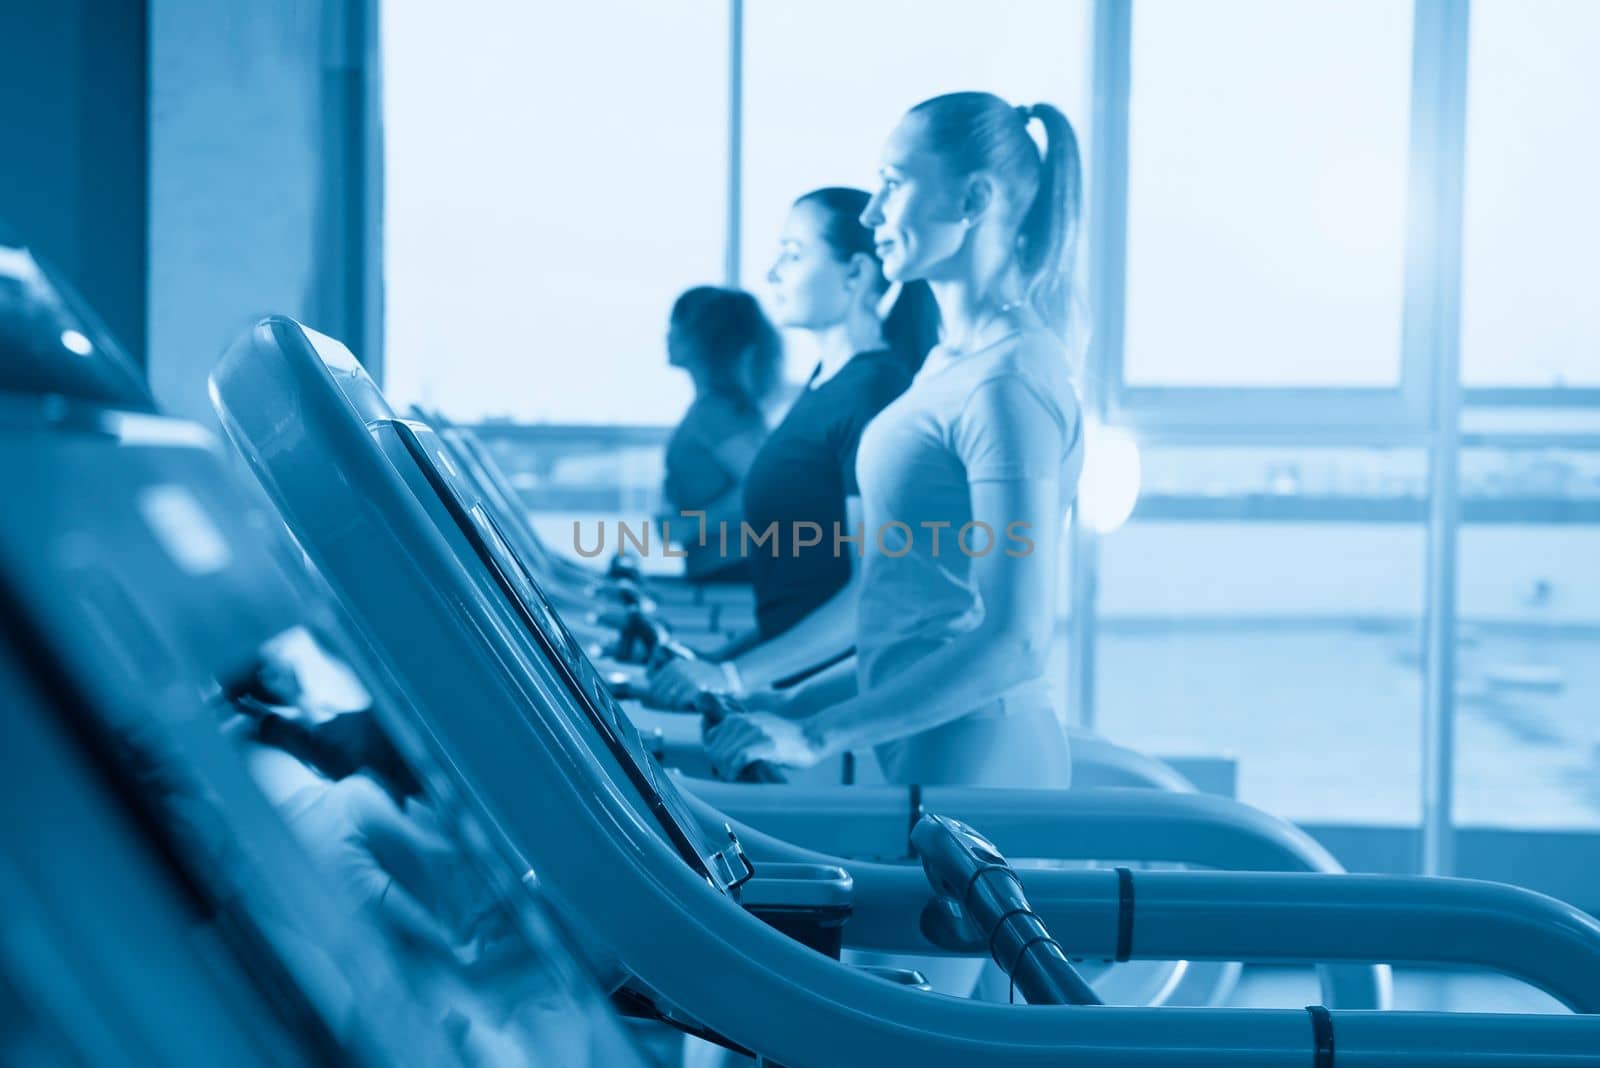 group of young people running on treadmills in modern sport gym